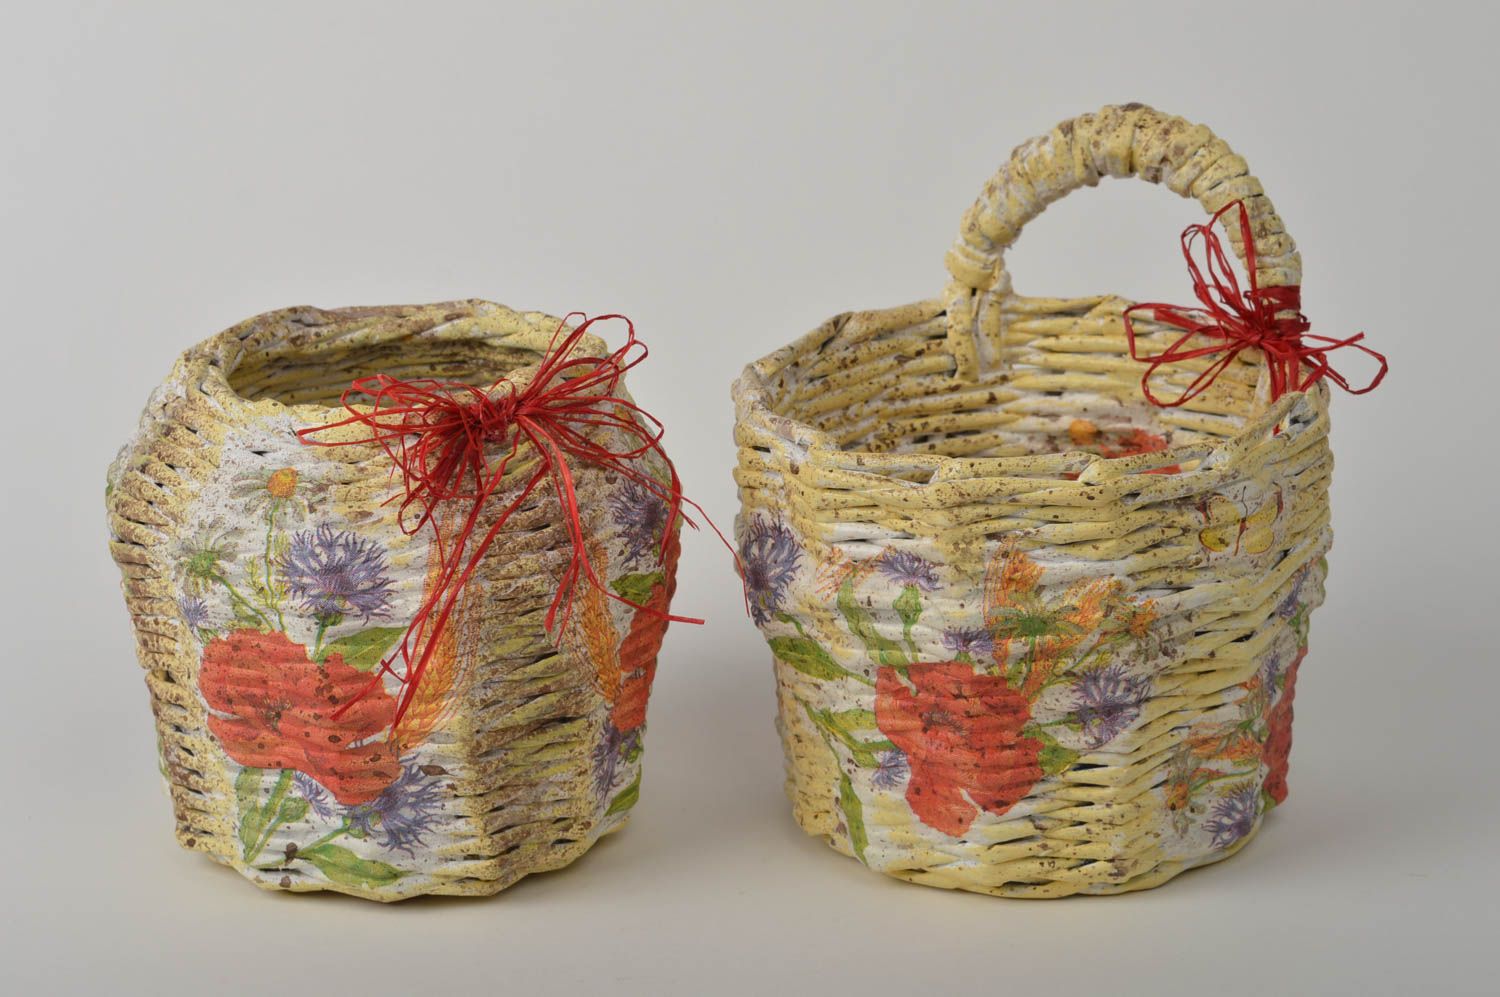 Set of two made of straw vase baskets for home décor 0,8 lb foto 3